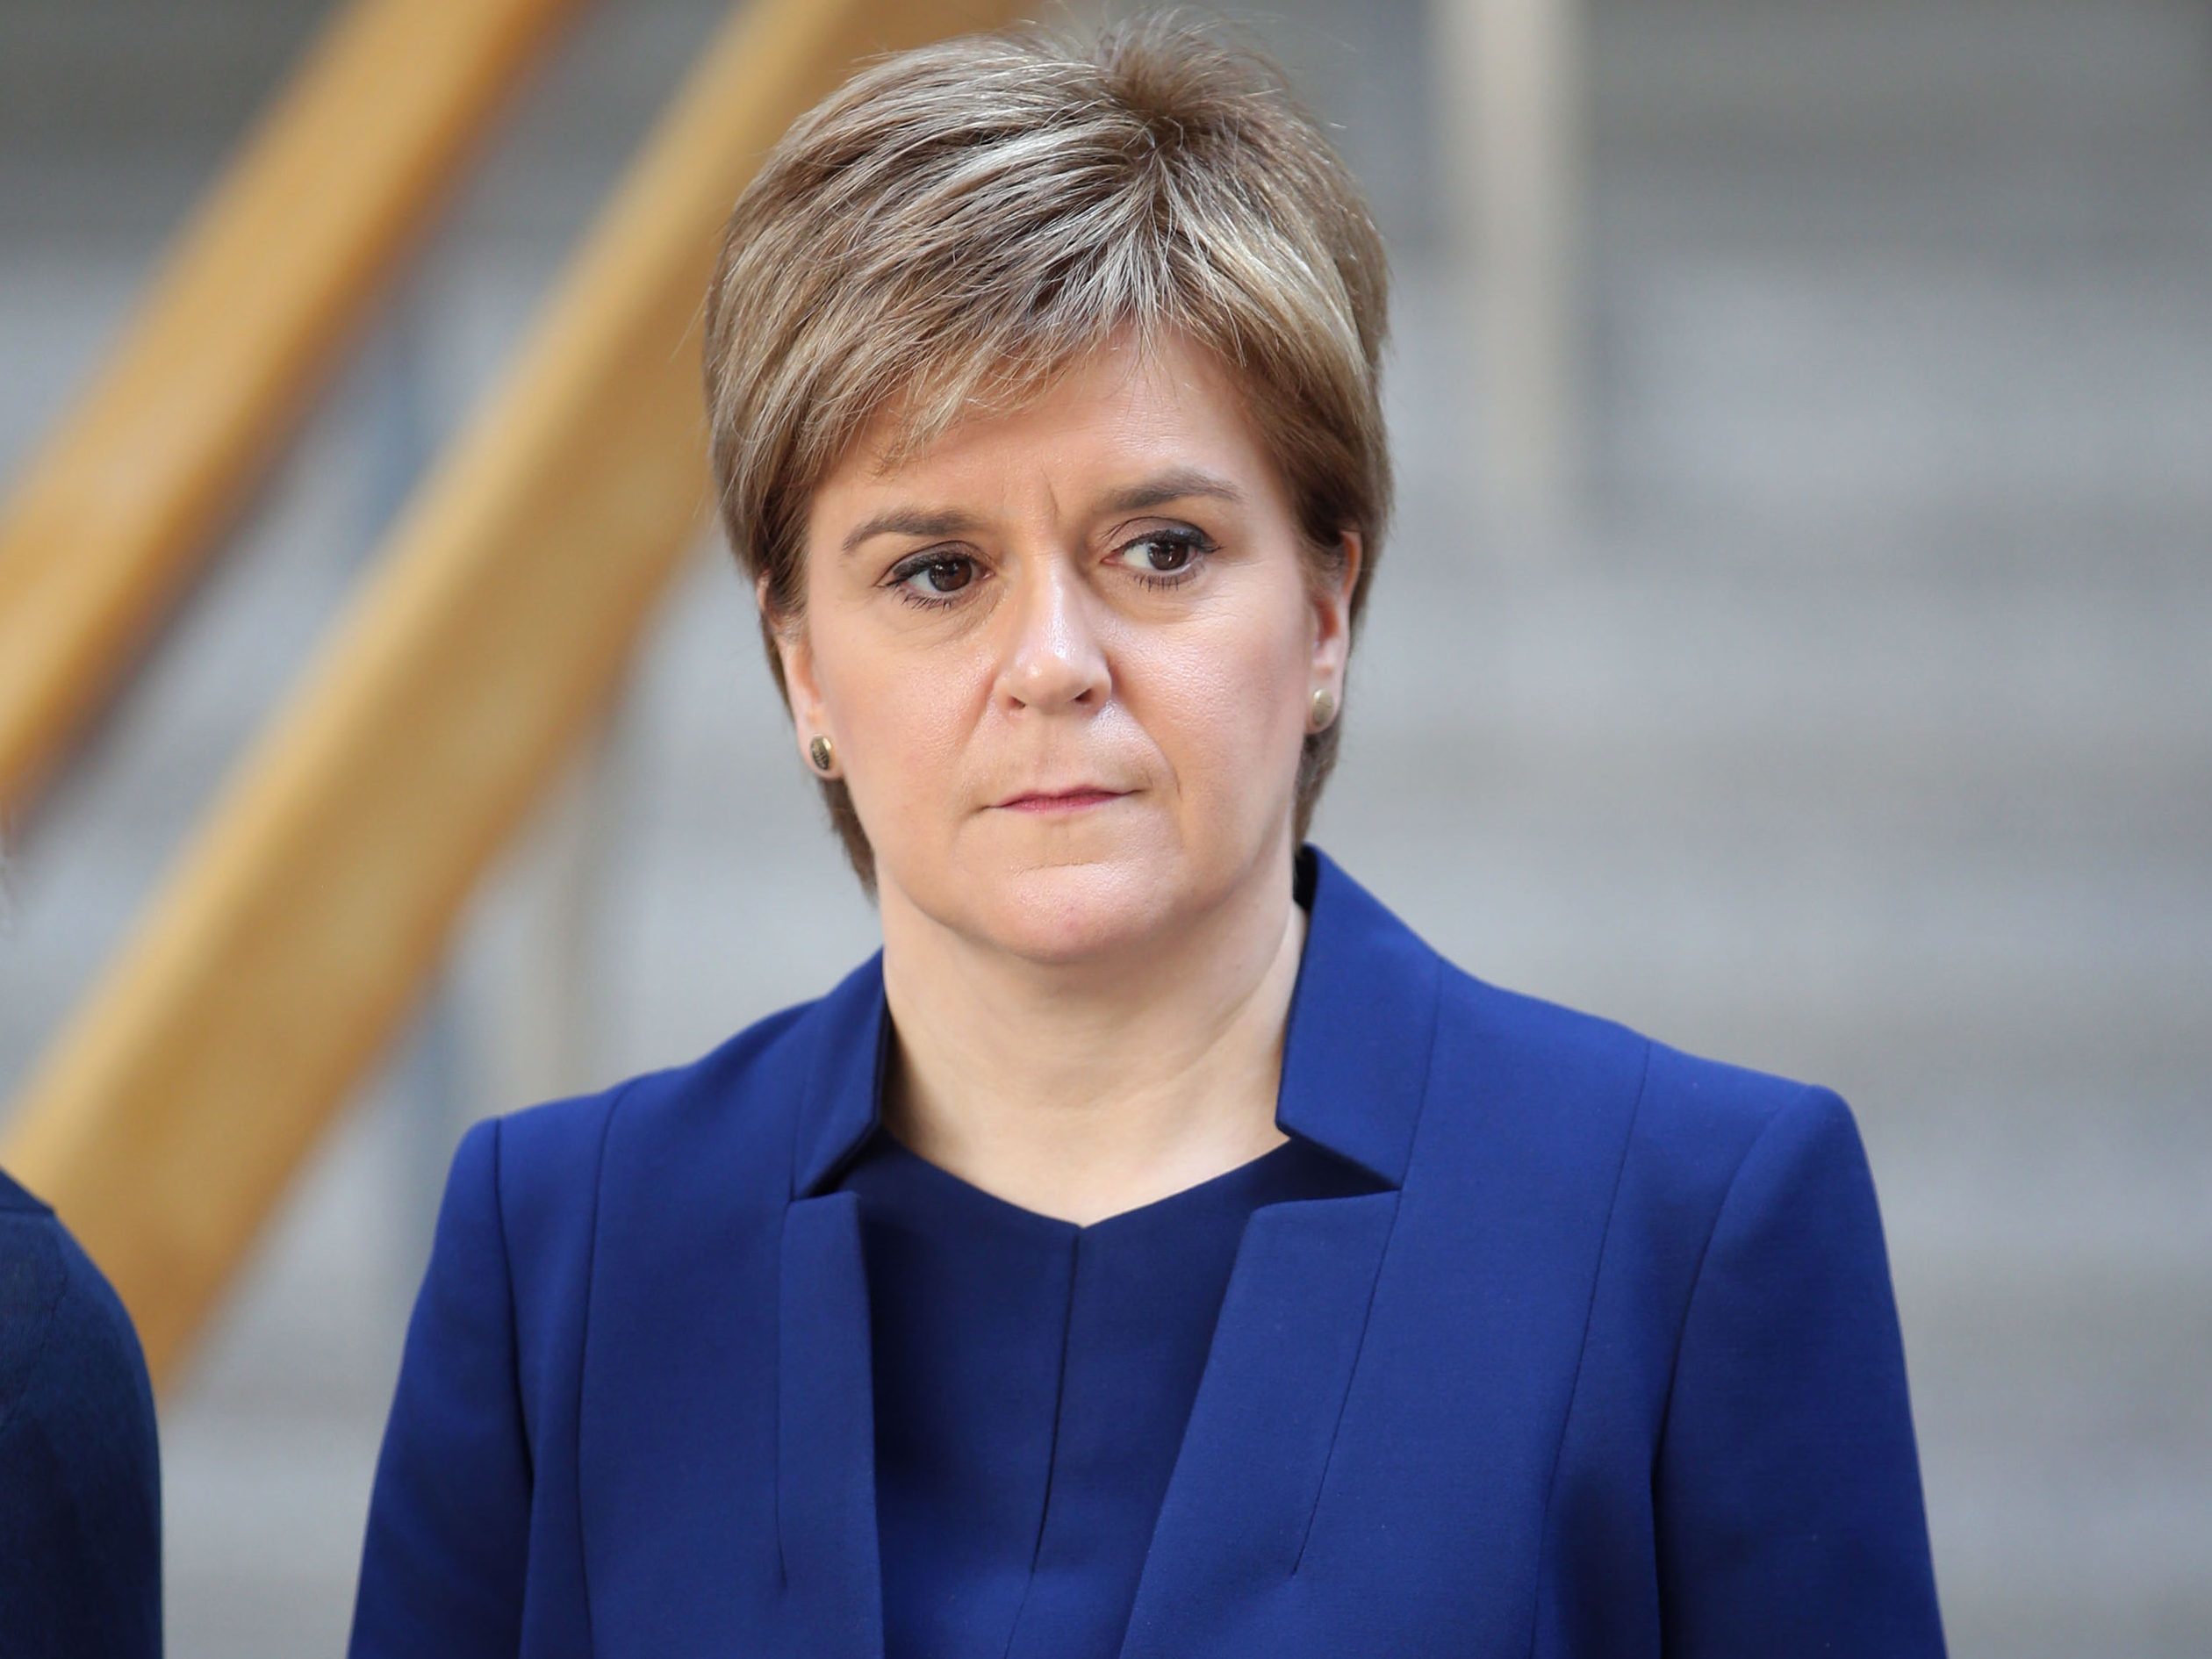 First Minister Nicola Sturgeon joins colleagues in observing a minute's silence to remember the victims of the terror attack in Manchester earlier this week (Jane Barlow/PA Wire)